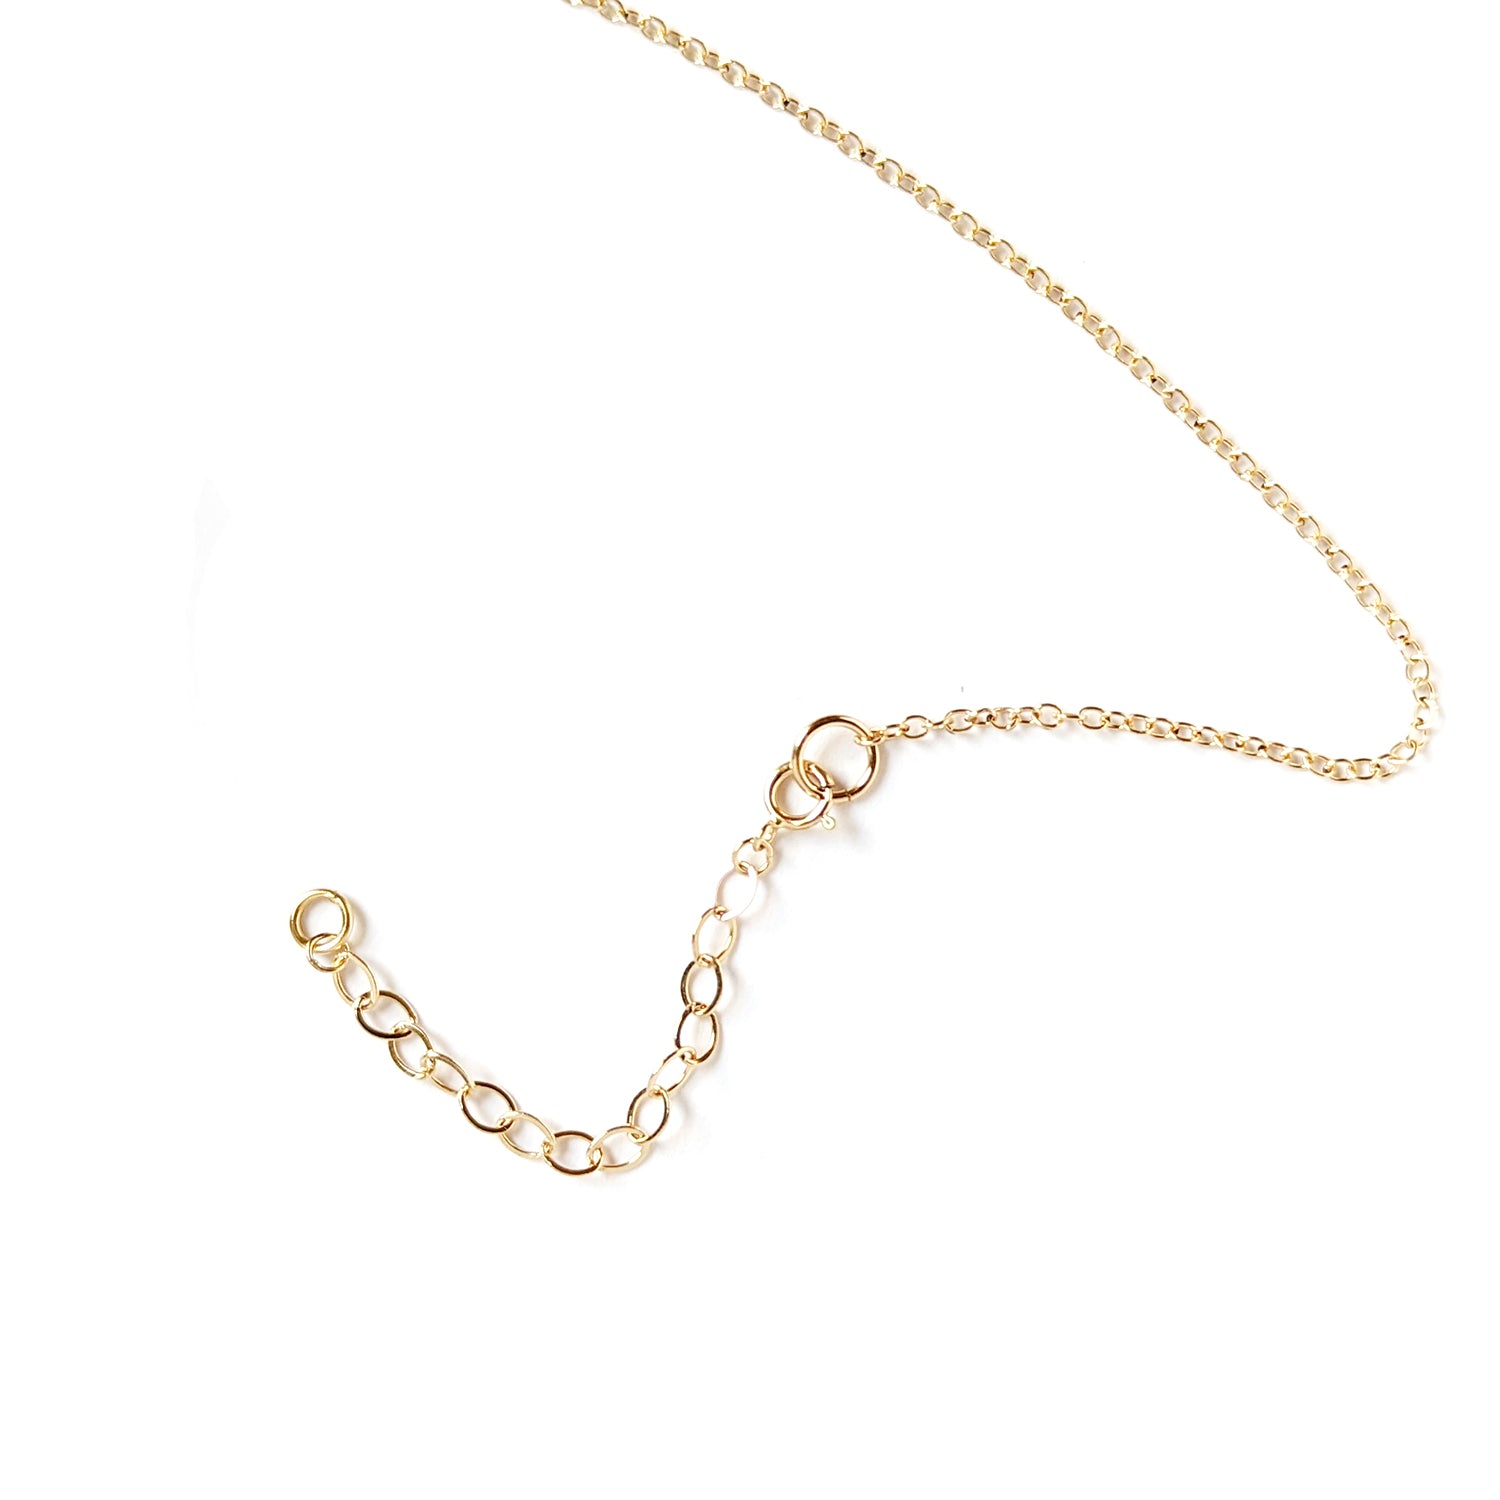 14K Gold Fill Extender Cable Chain for Necklaces